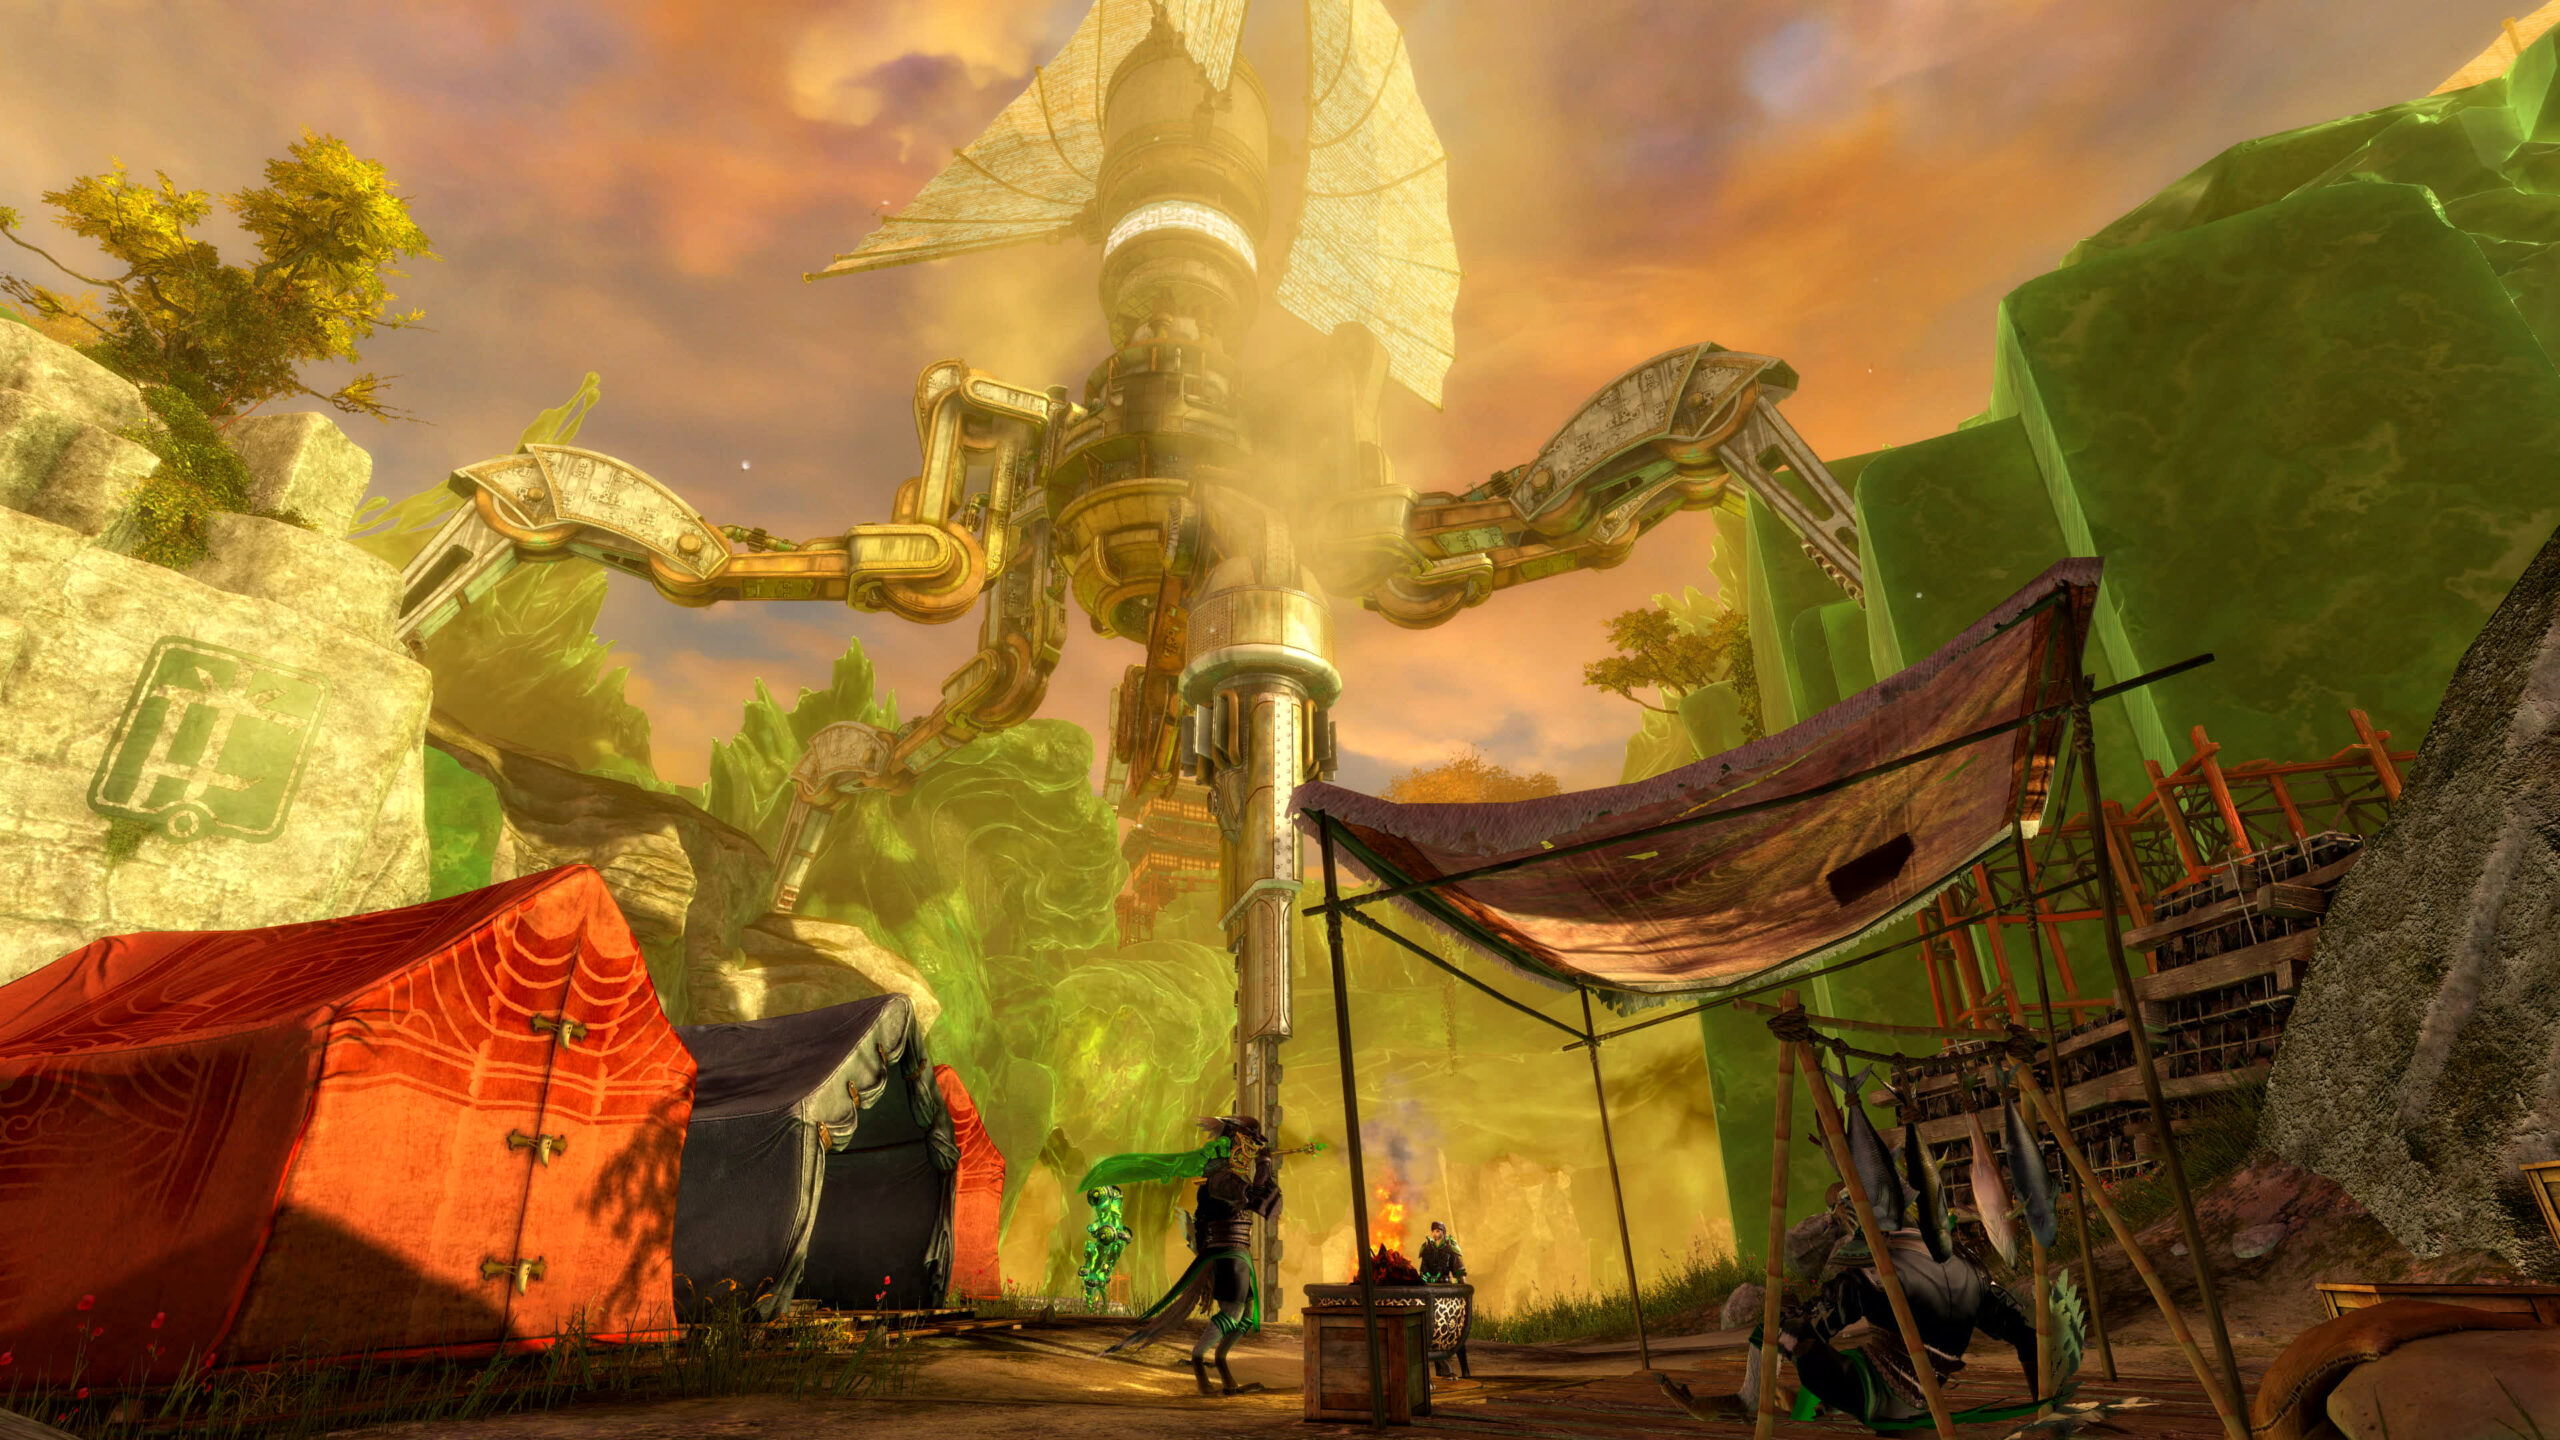 Guild Wars 2 Launches New Chapter: “What Lies Beneath” for End of Dragons Storyline